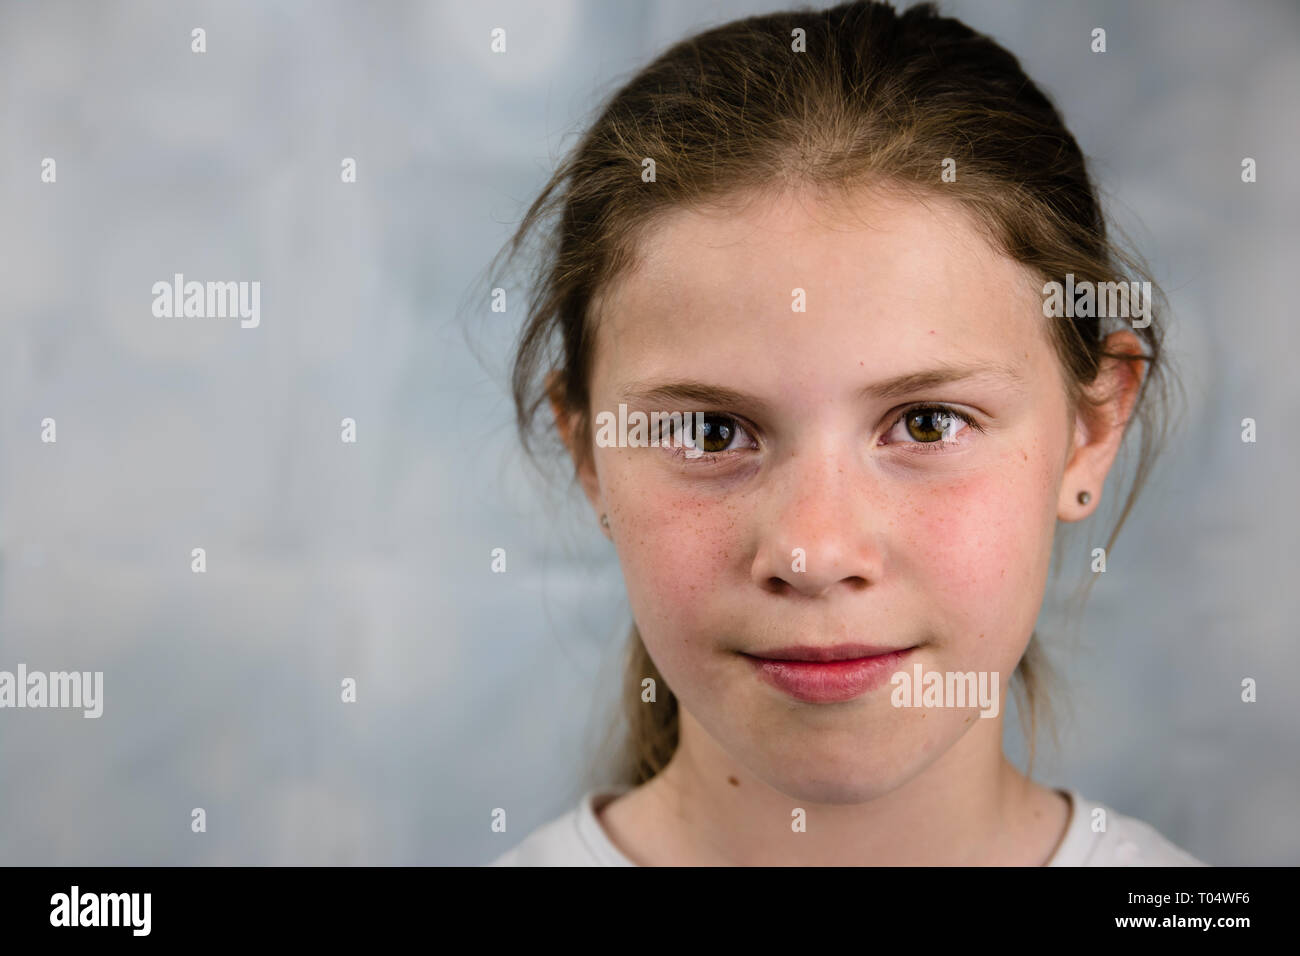 Authentic portrait of caucasian tween girl, very casual natural styling and neutral smile, on a light background with copy space Stock Photo